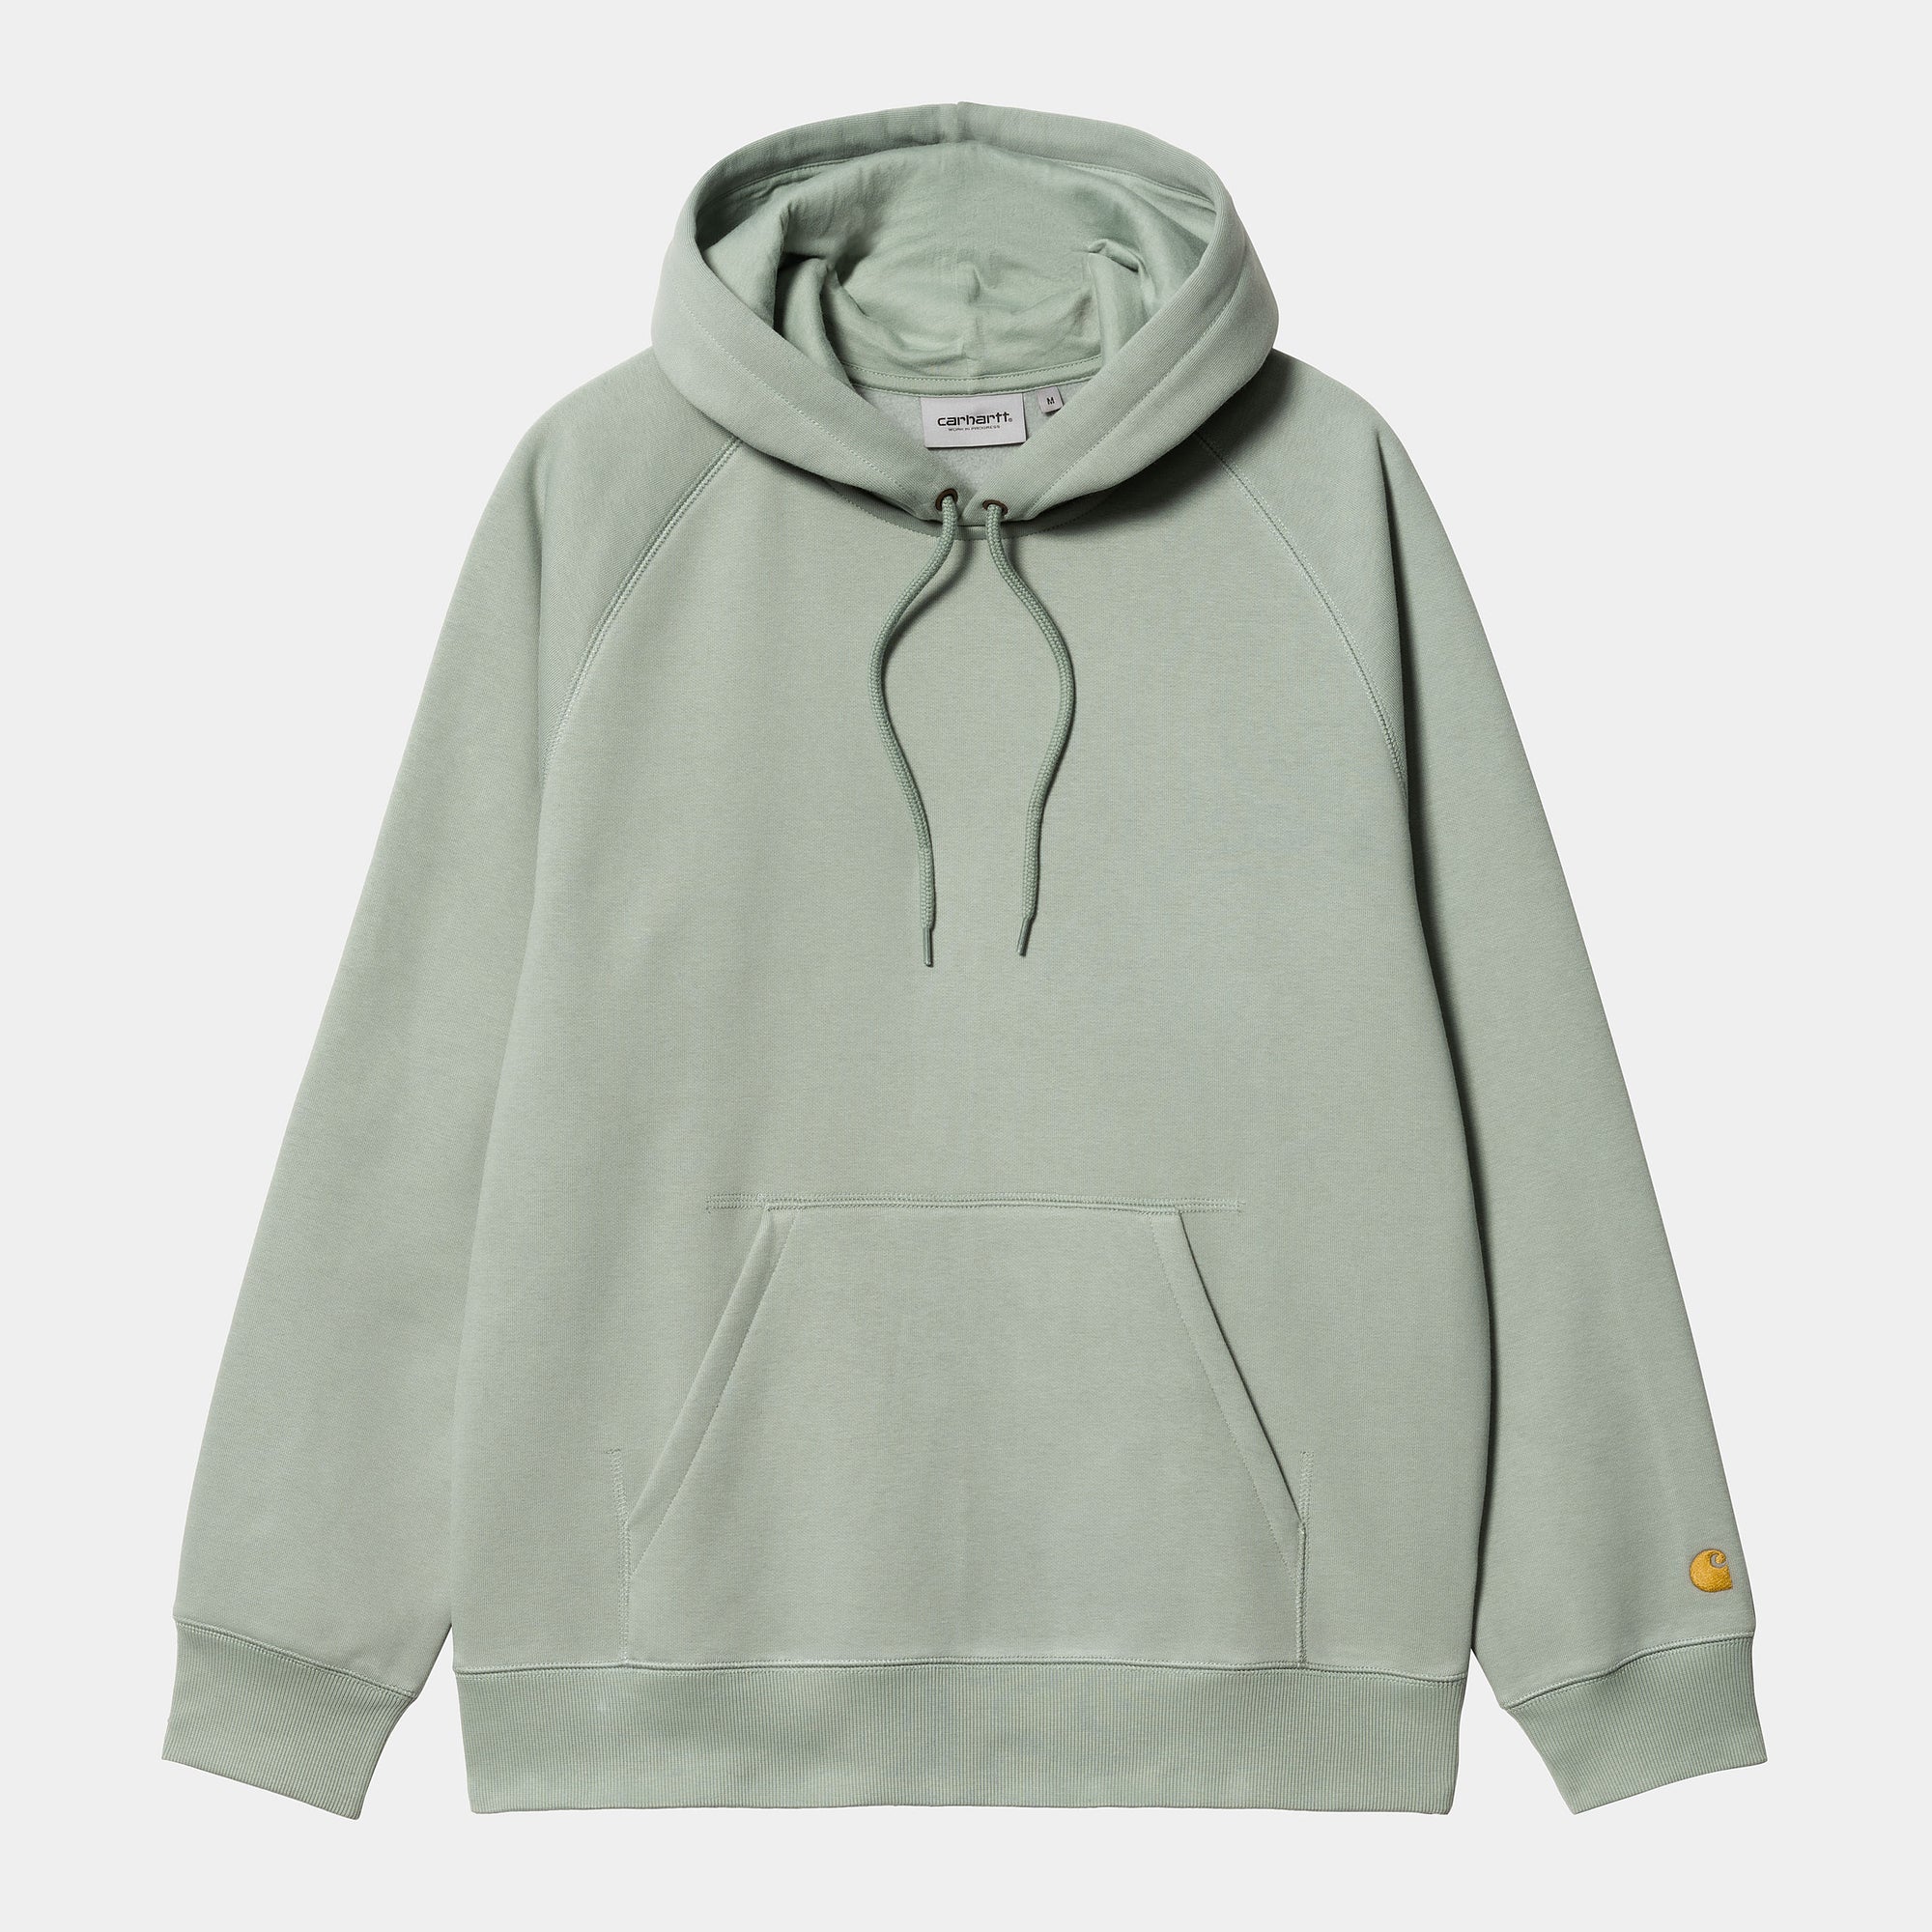 Carhartt WIP Glassy Teal Chase Pullover Hooded Sweatshirt